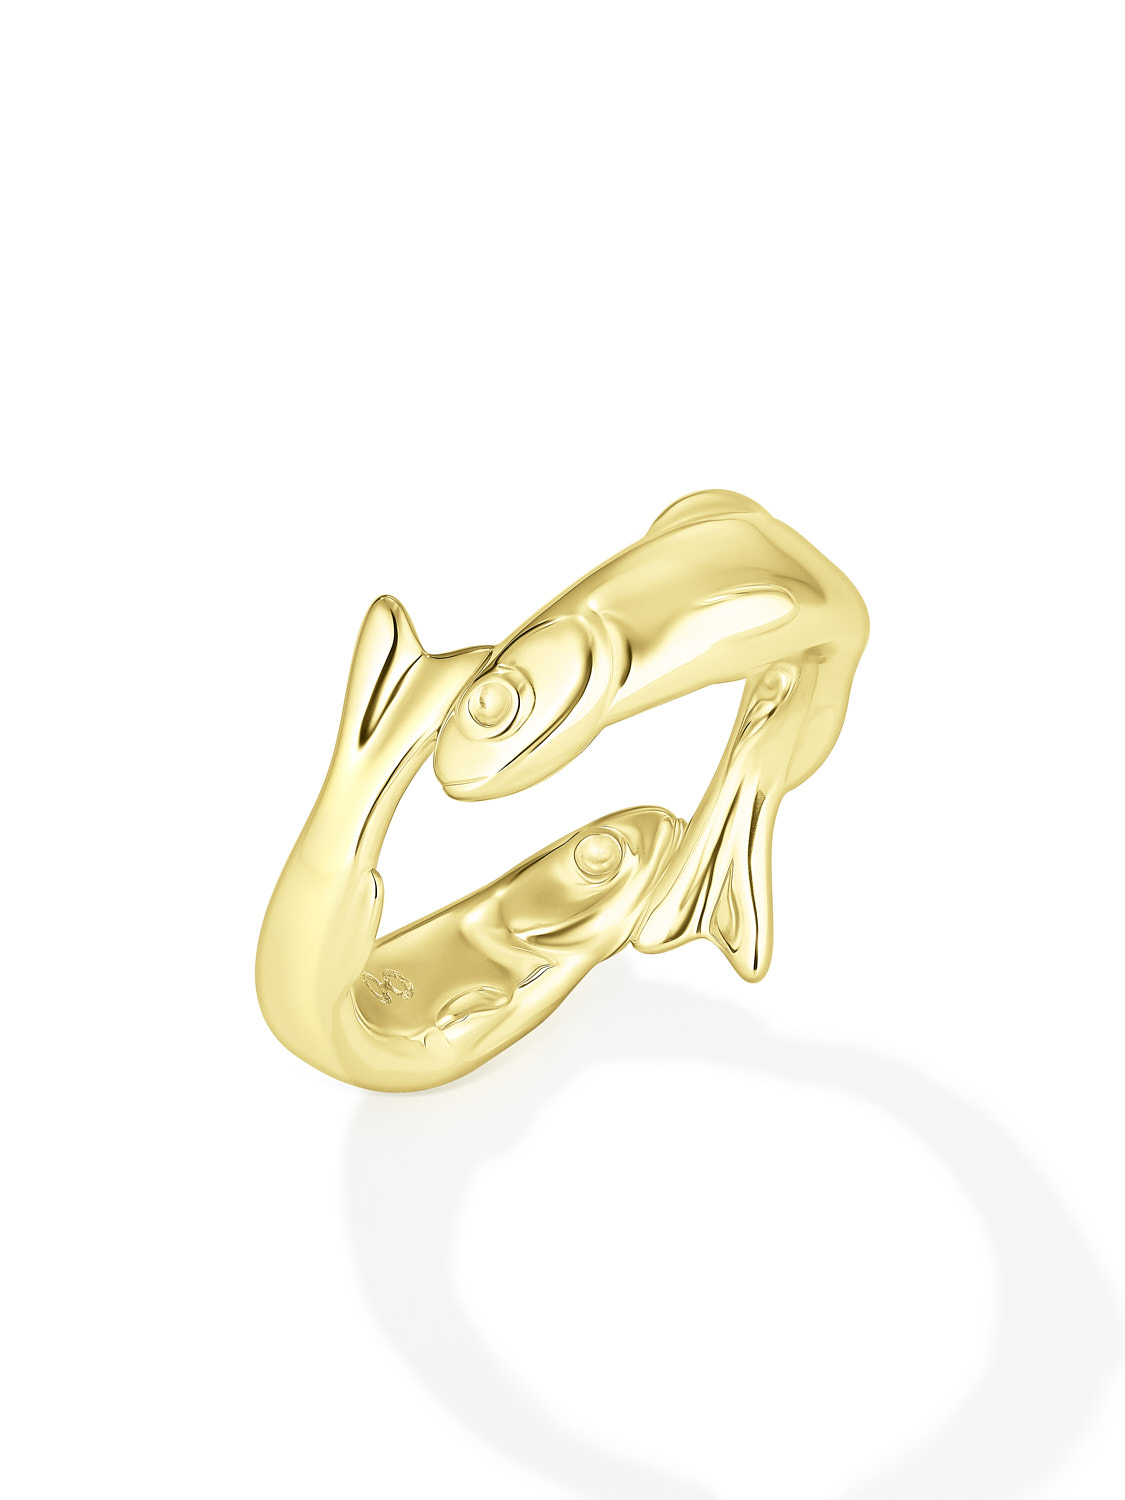 TWIN FISH RING GOLD-PLATED